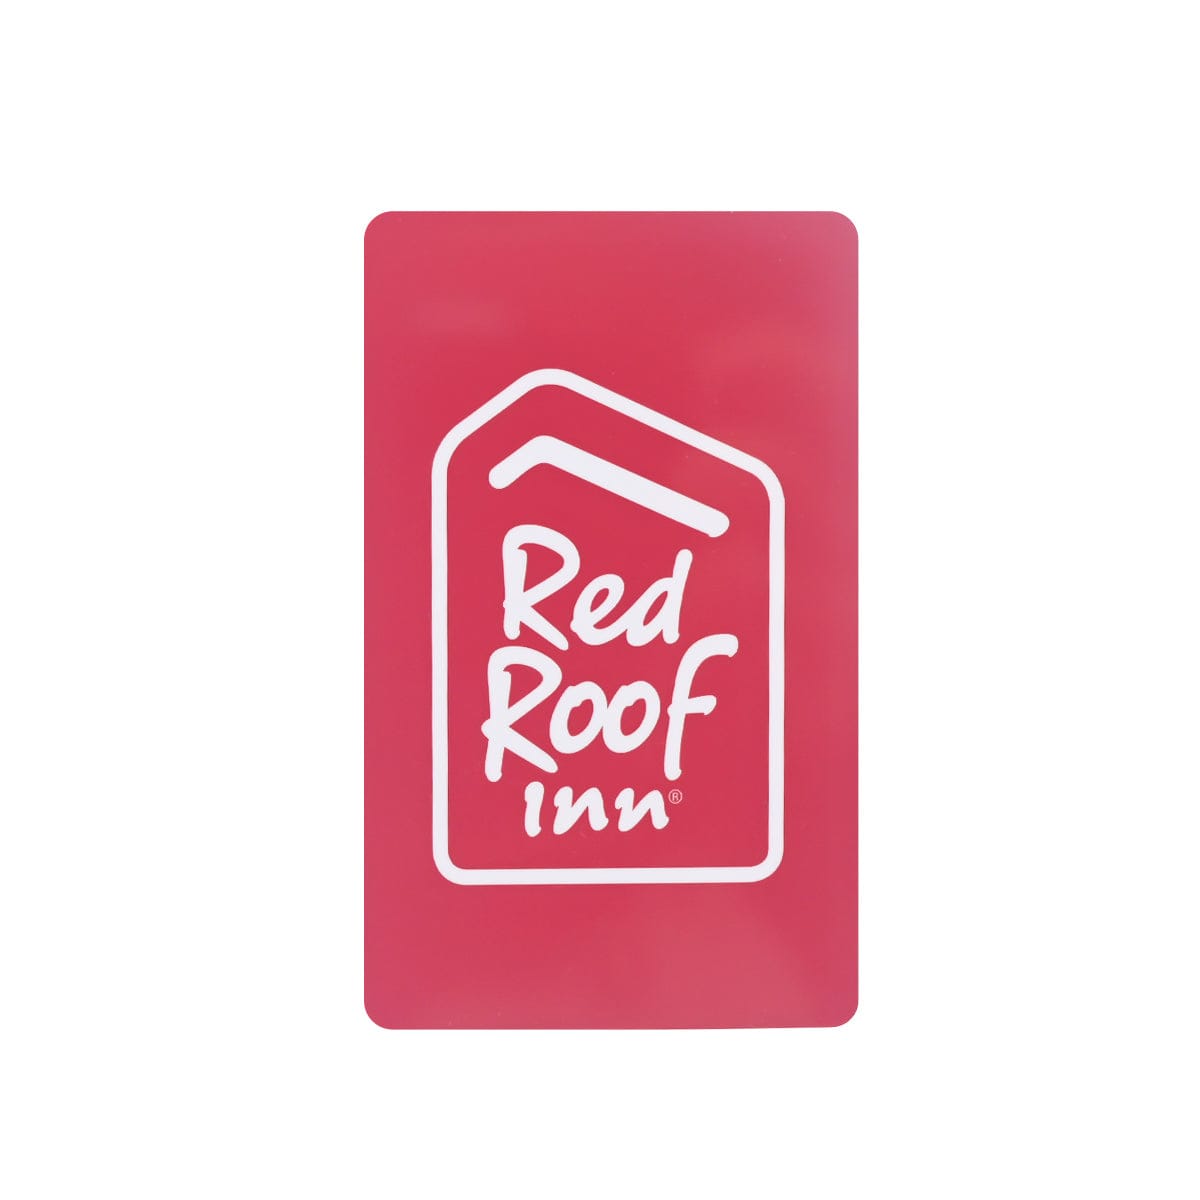 Red Roof Inn RFID Key Cards (Sold in boxes of 200)